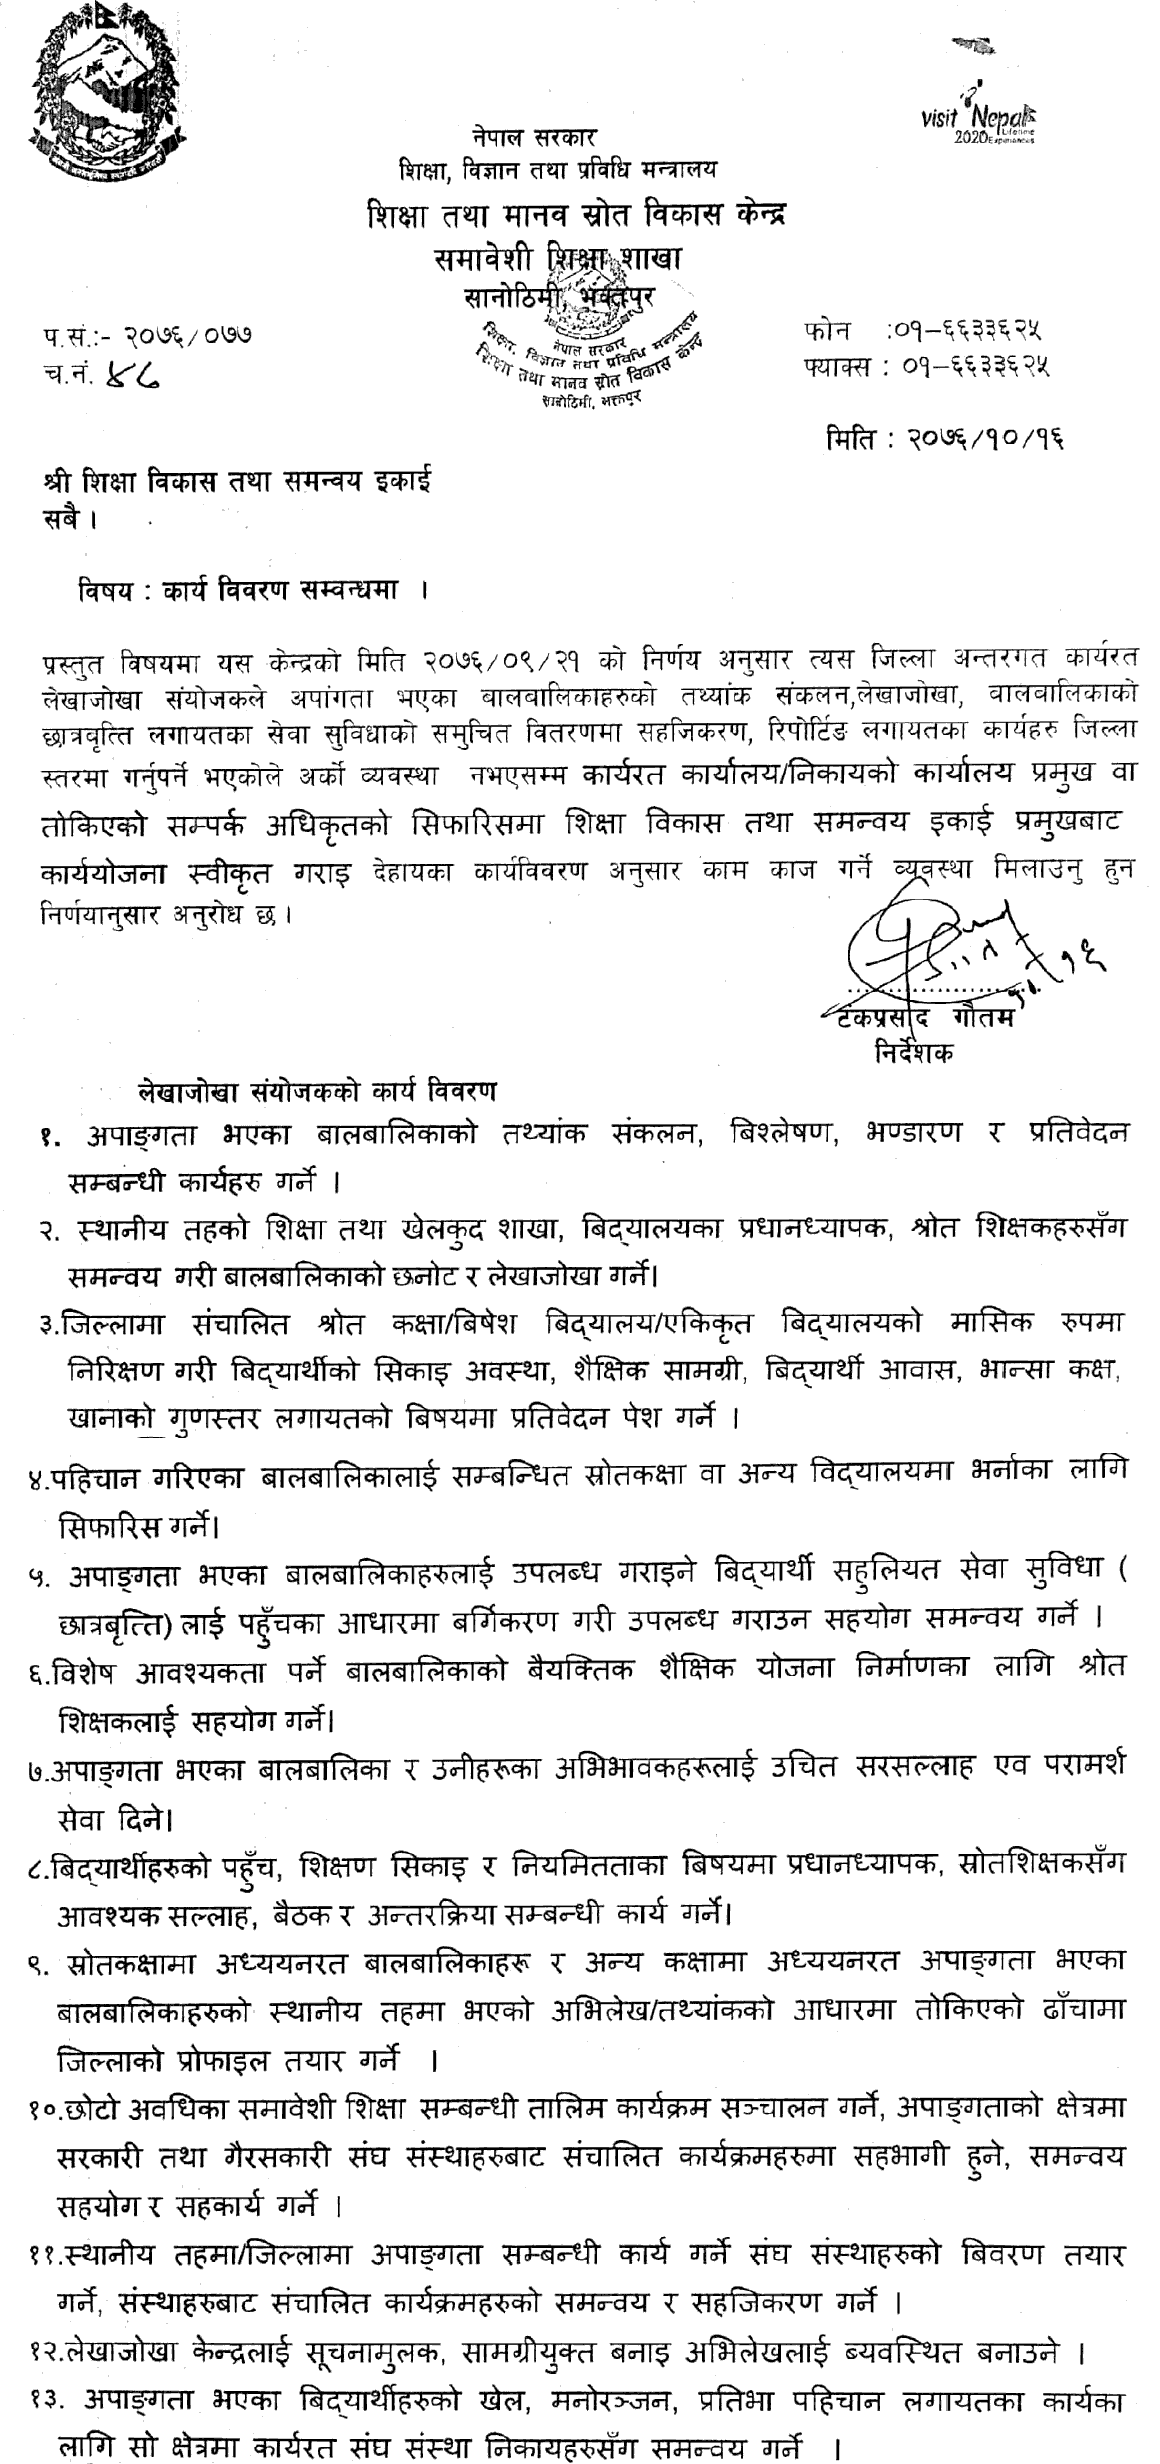 Ministry of Education Notice Dated on 2076 Magh 22